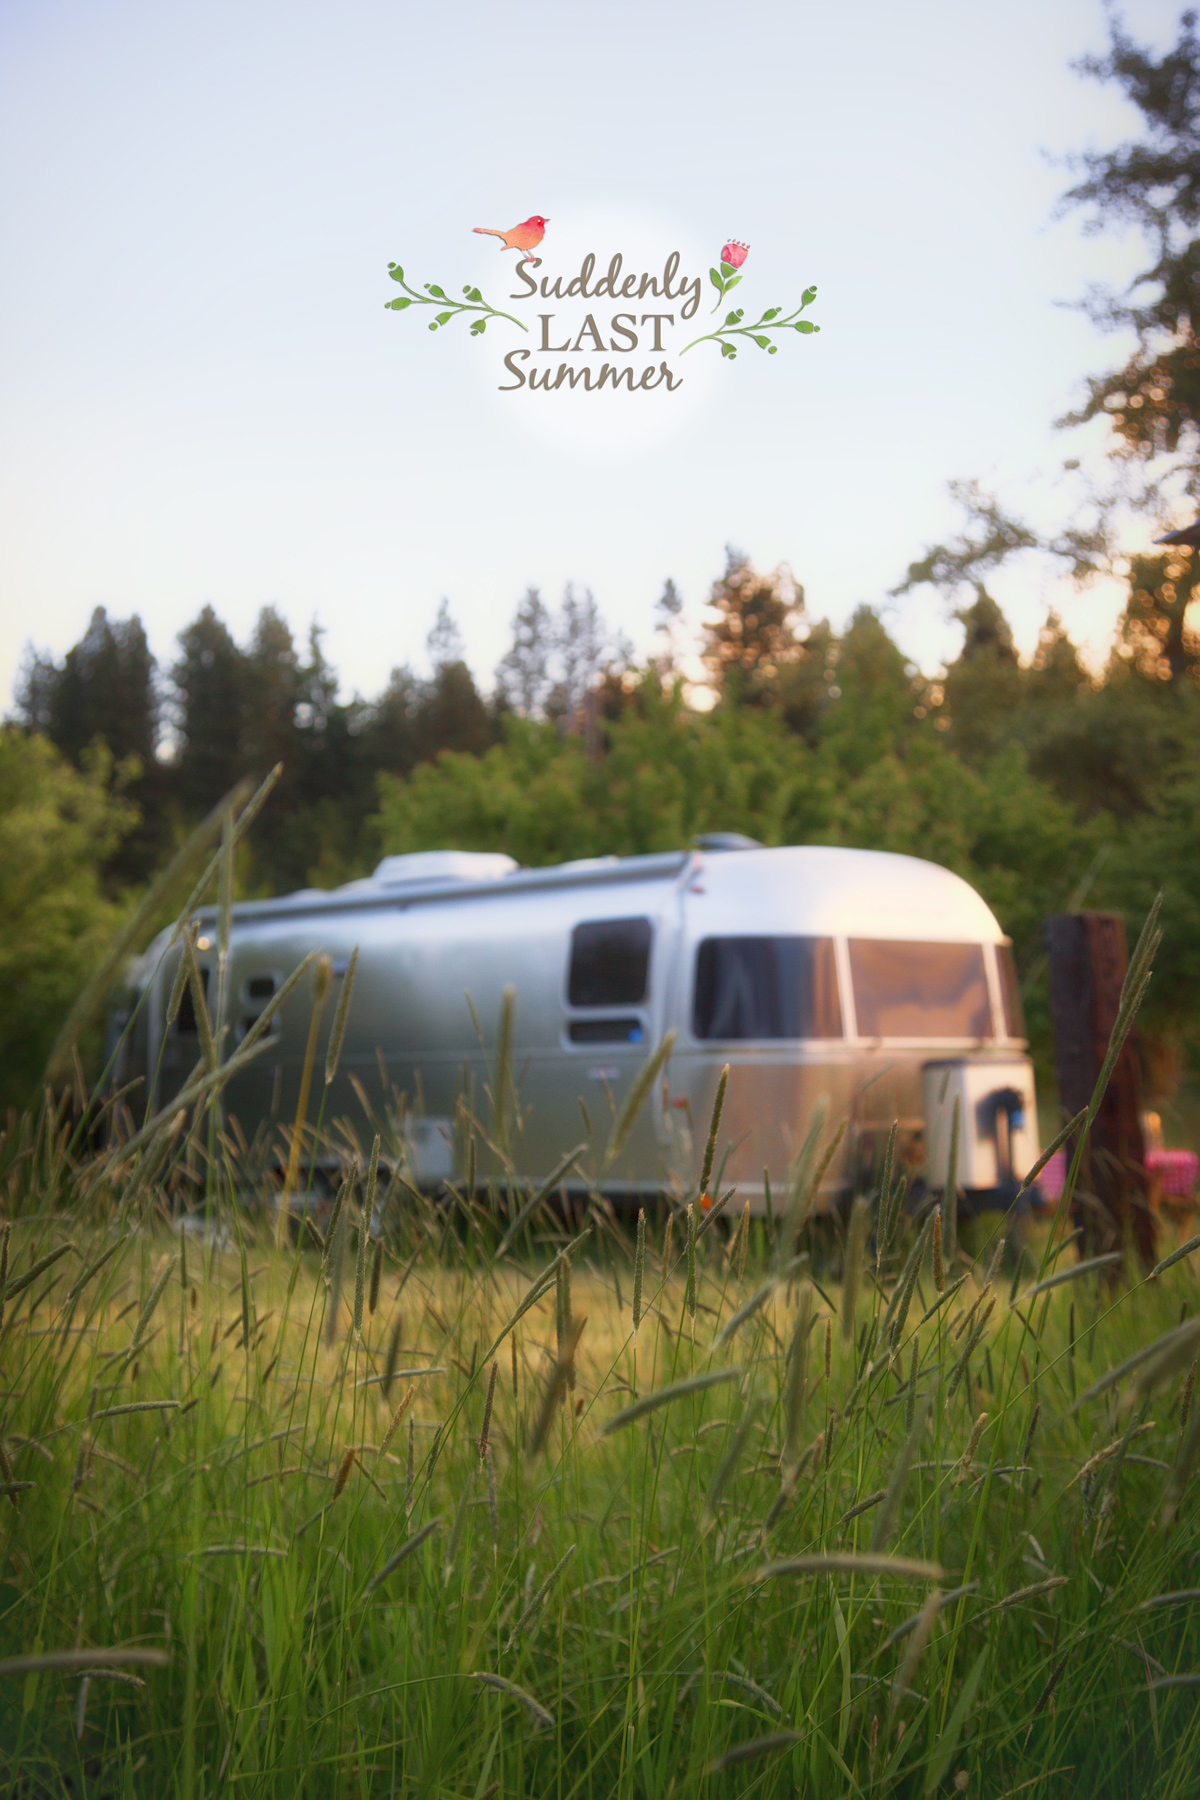 Suddenly Last Summer with our Airstream via J5MM.com